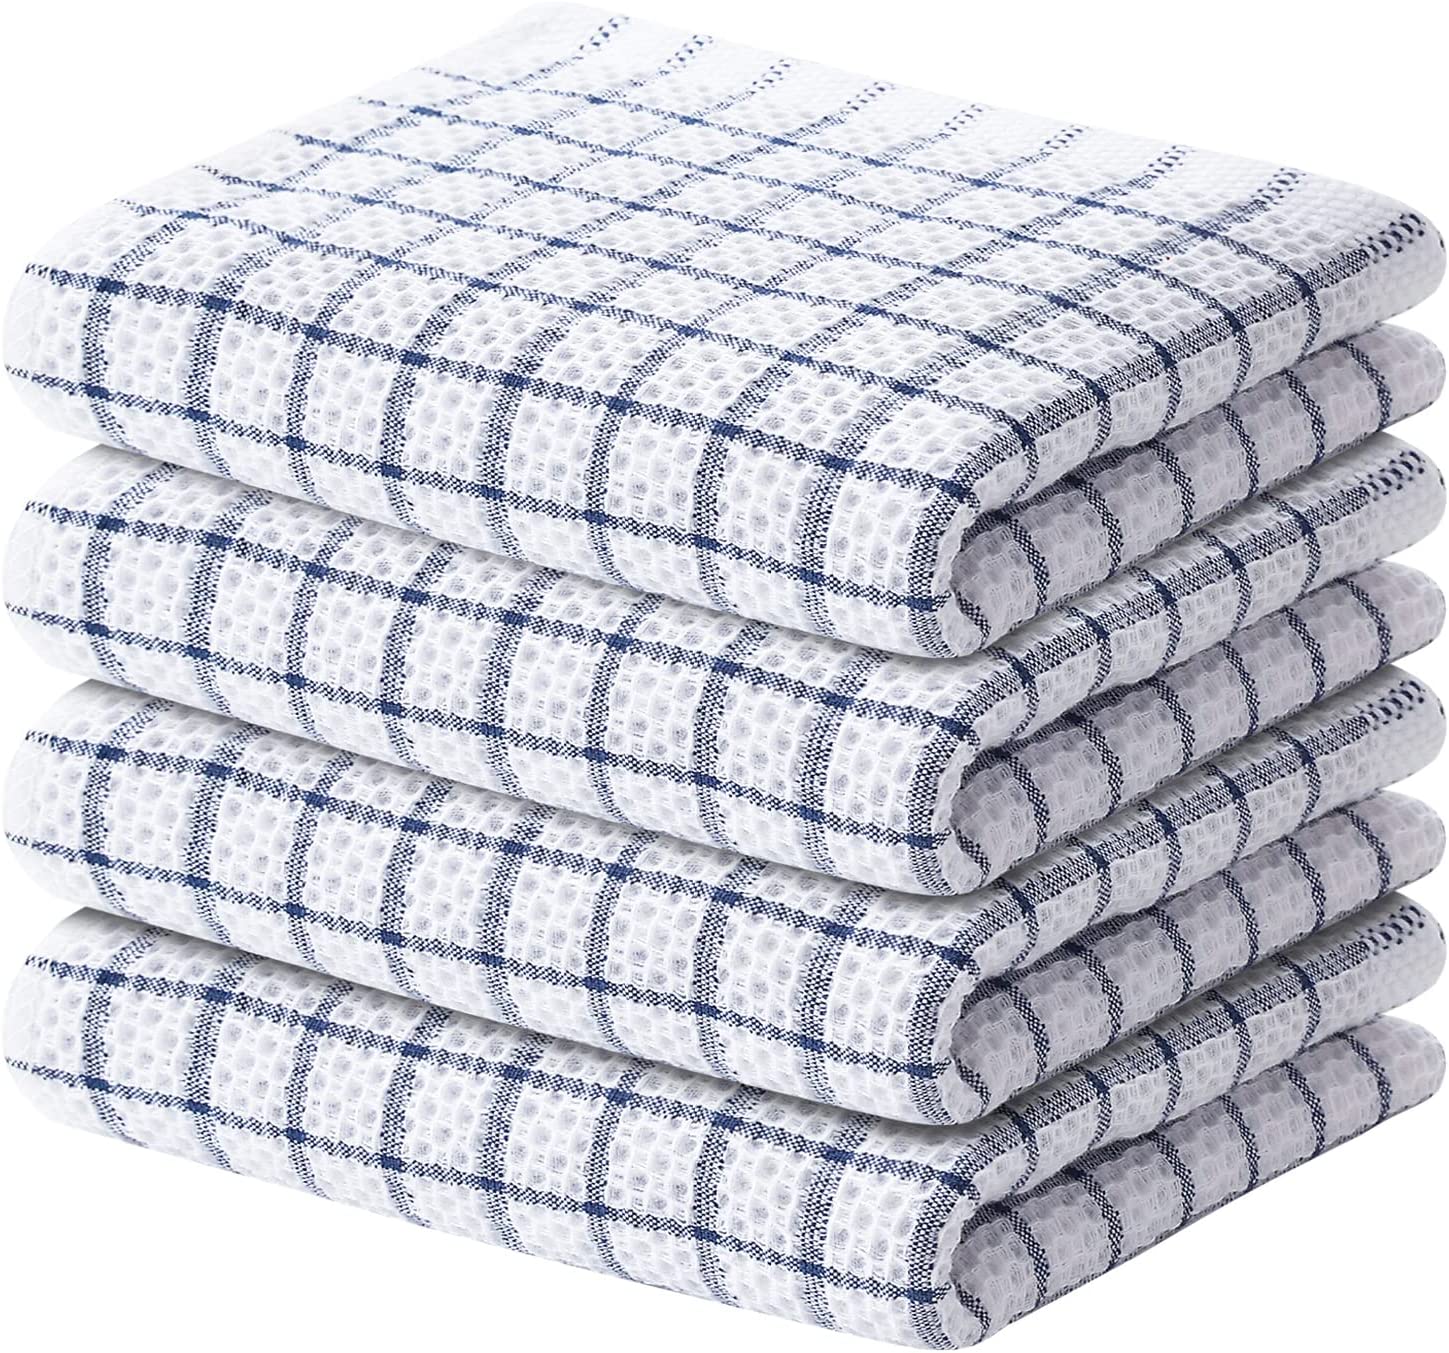 Fintale Kitchen Dish Cloths 6 Pack,12 x 12 Inches,100% Cotton Waffle Weave  Soft and Super Absorbent Dish Towels, Quick Drying Dish Rags for Washing